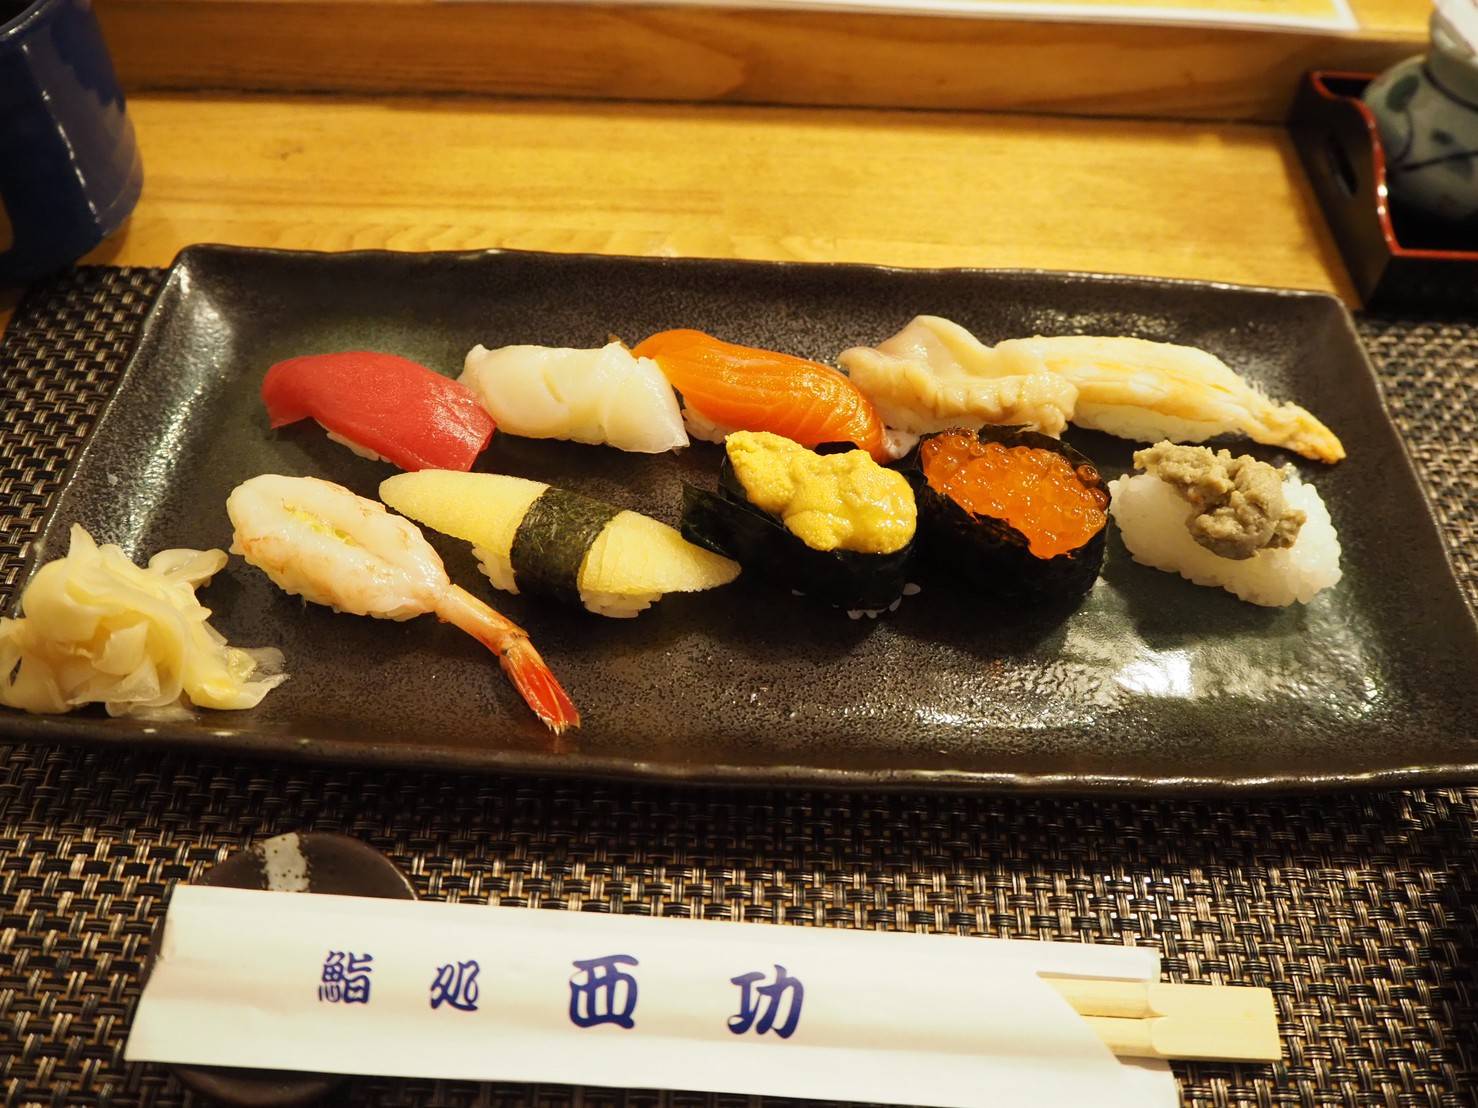 We had some fantastic sushi in a little restaurant along that road.